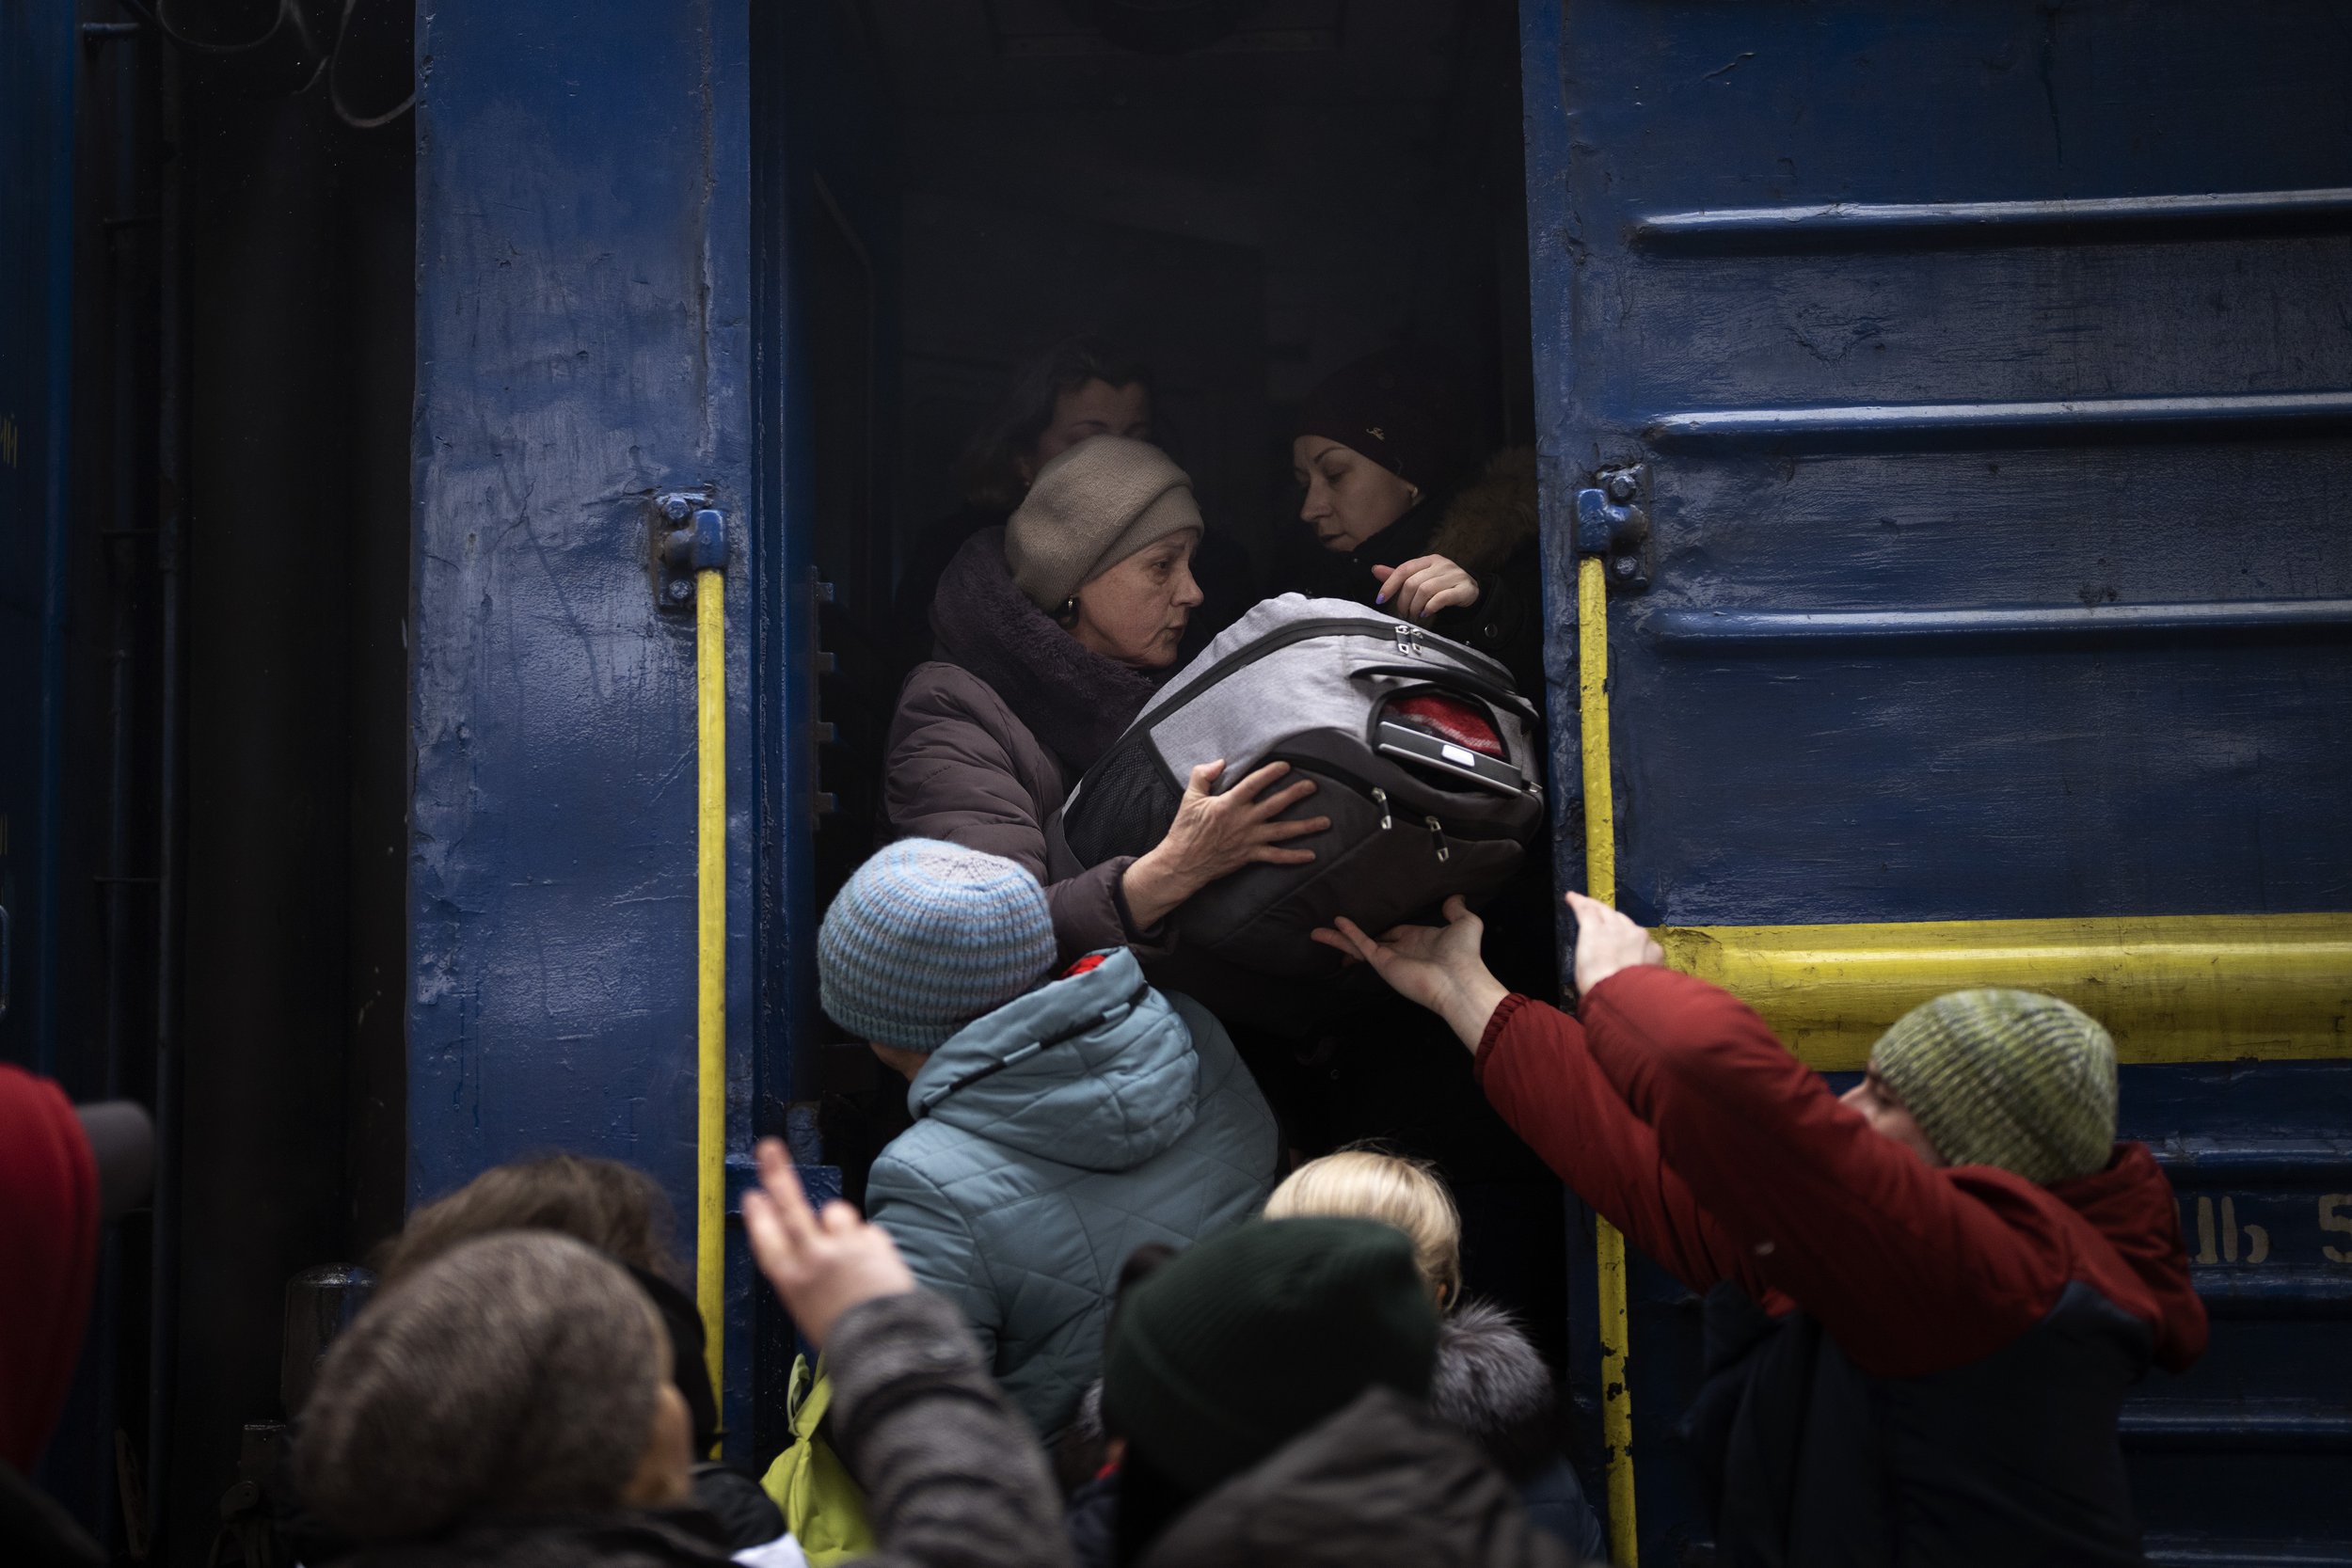  Women and children try to get onto a train bound for Lviv, at the Kyiv station in Ukraine, Thursday, March 3. 2022. (AP Photo/Emilio Morenatti) 